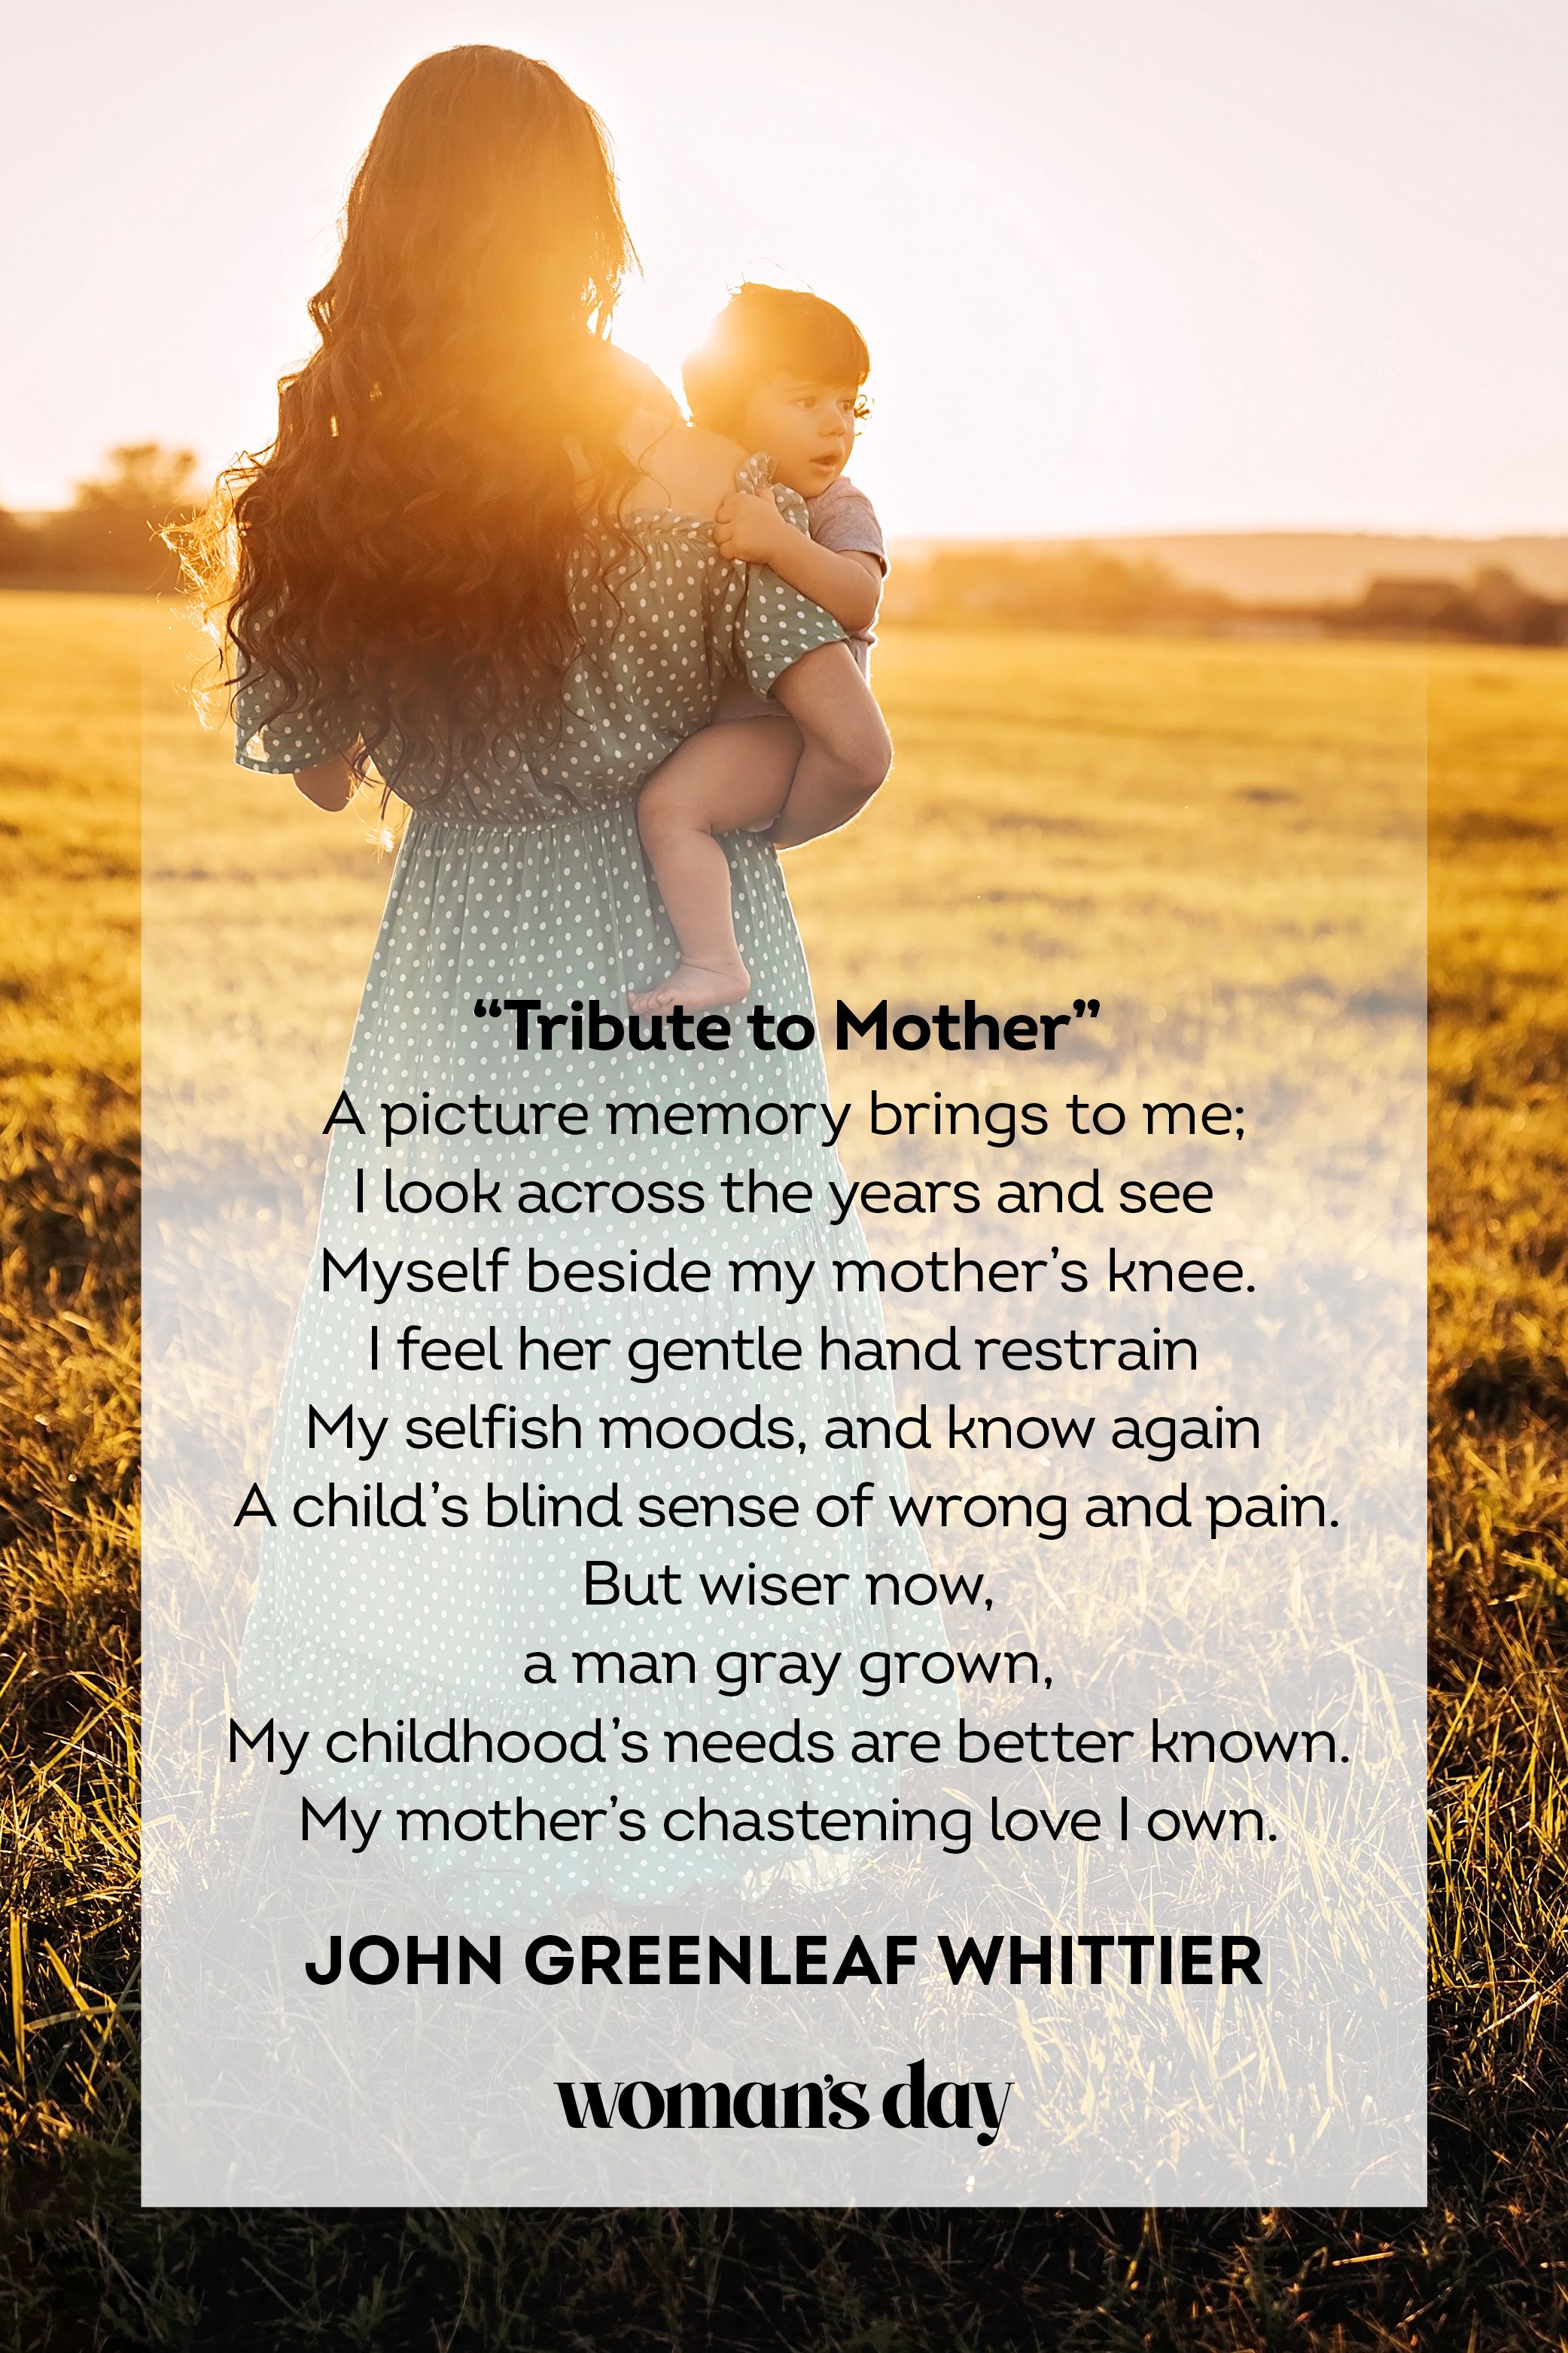 Quotes From Mother To Daughter On Mother'S Day - Viki Almeria